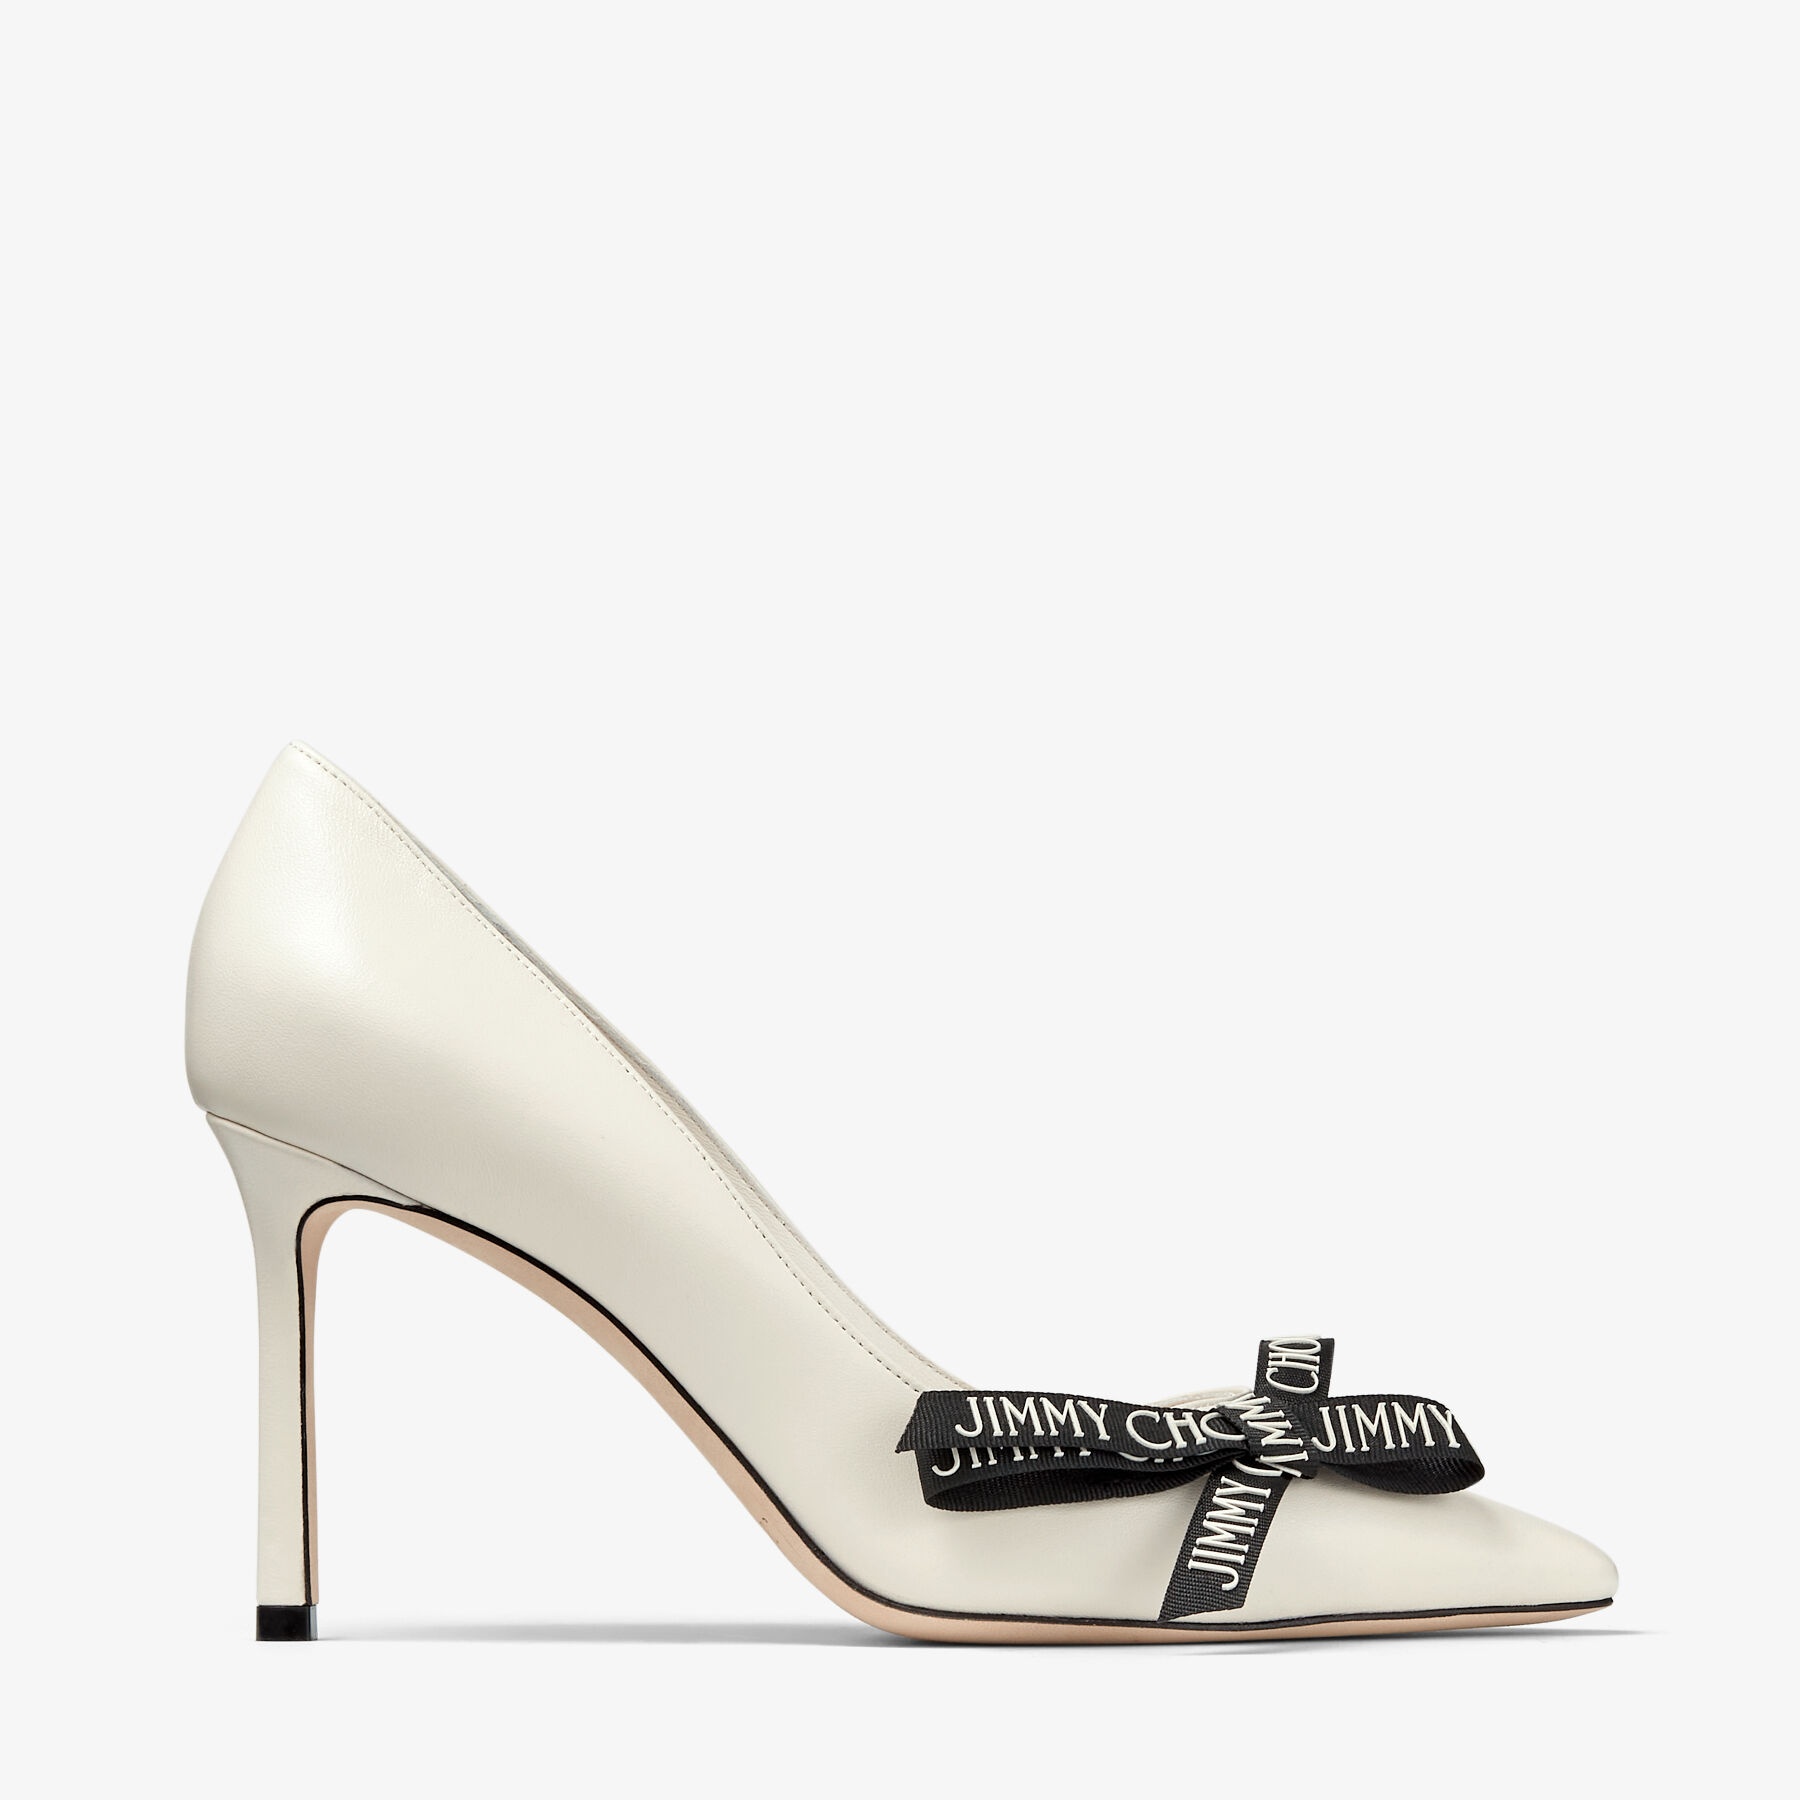 JIMMY CHOO Romy 85 Latte Nappa Leather Pumps with Jimmy Choo Bow |  REVERSIBLE